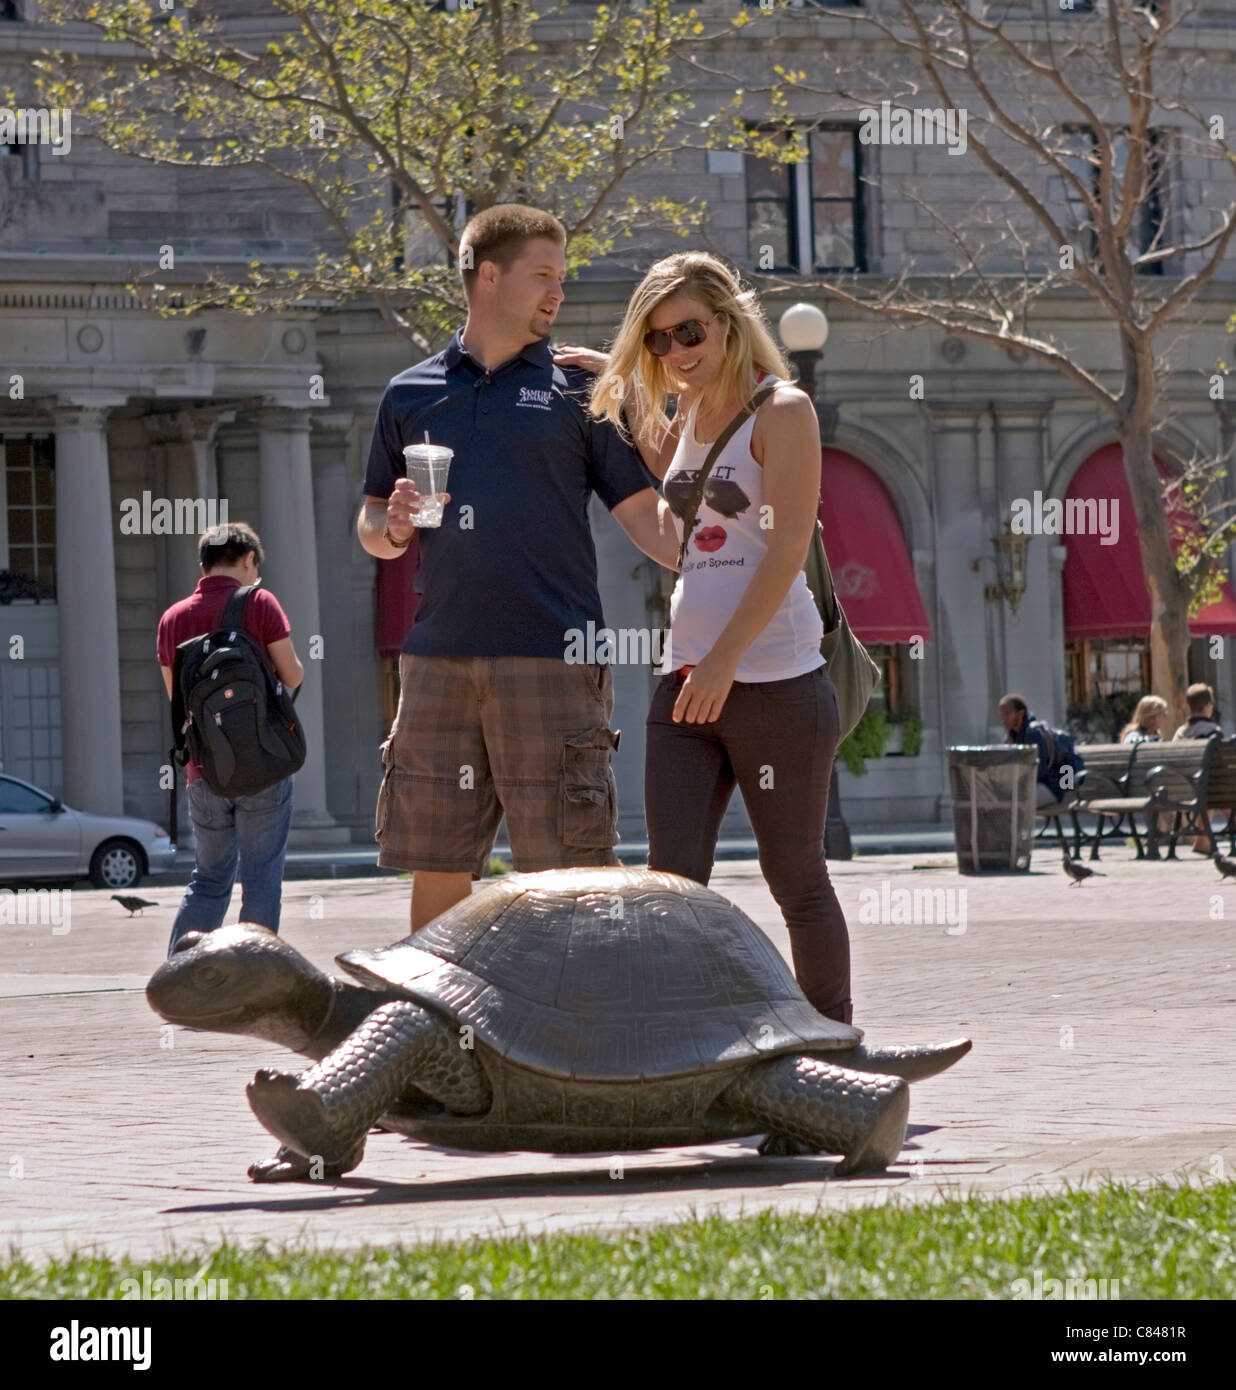 A tortoise sculpture in Boston draws attention from passersby. Stock Photo